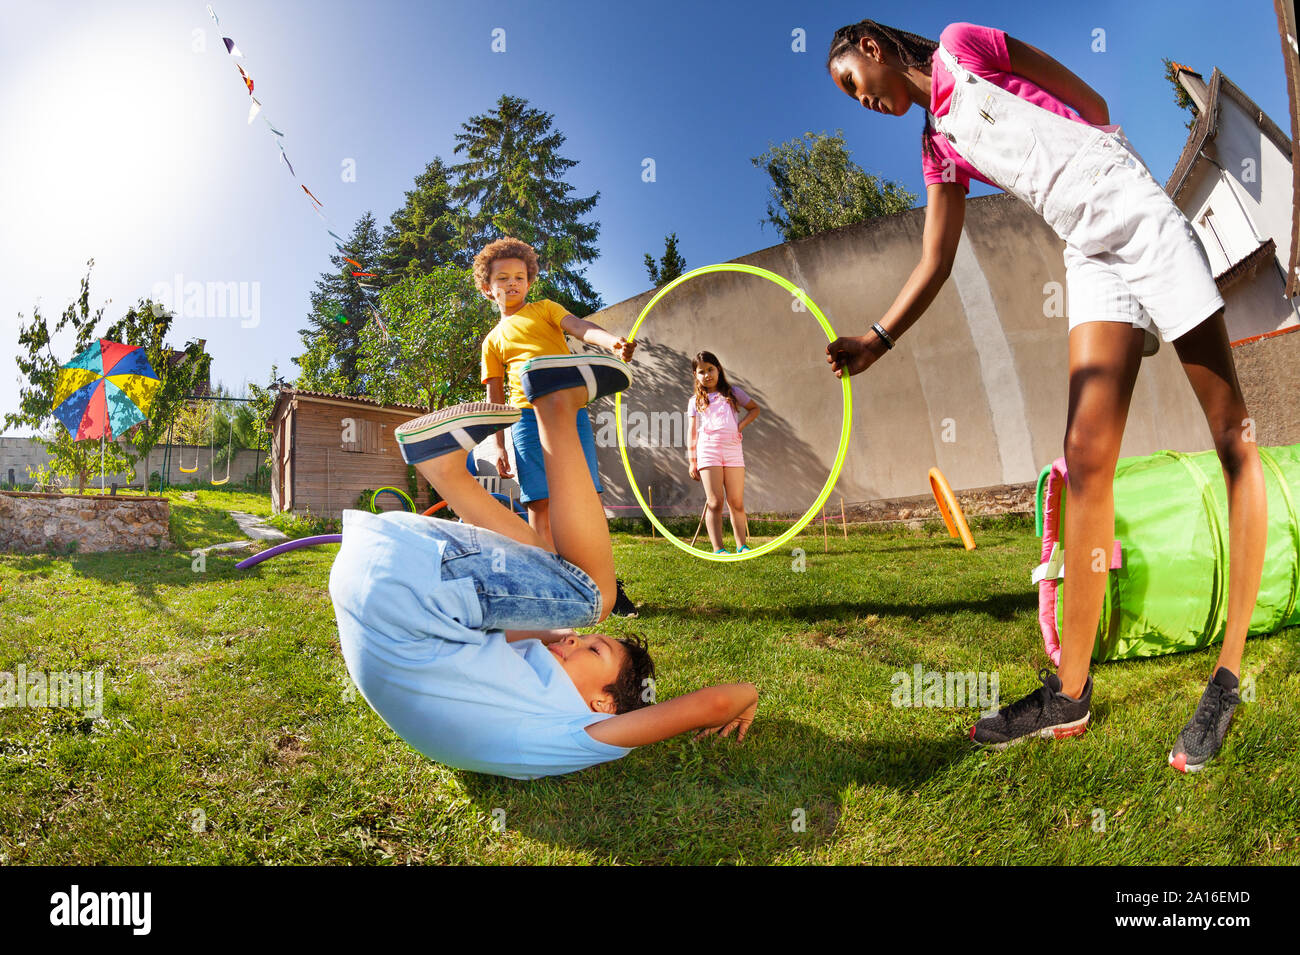 Happy boy jump through hula hoop ring hold by his friends on a playground lawn rolling on the grass after landing Stock Photo